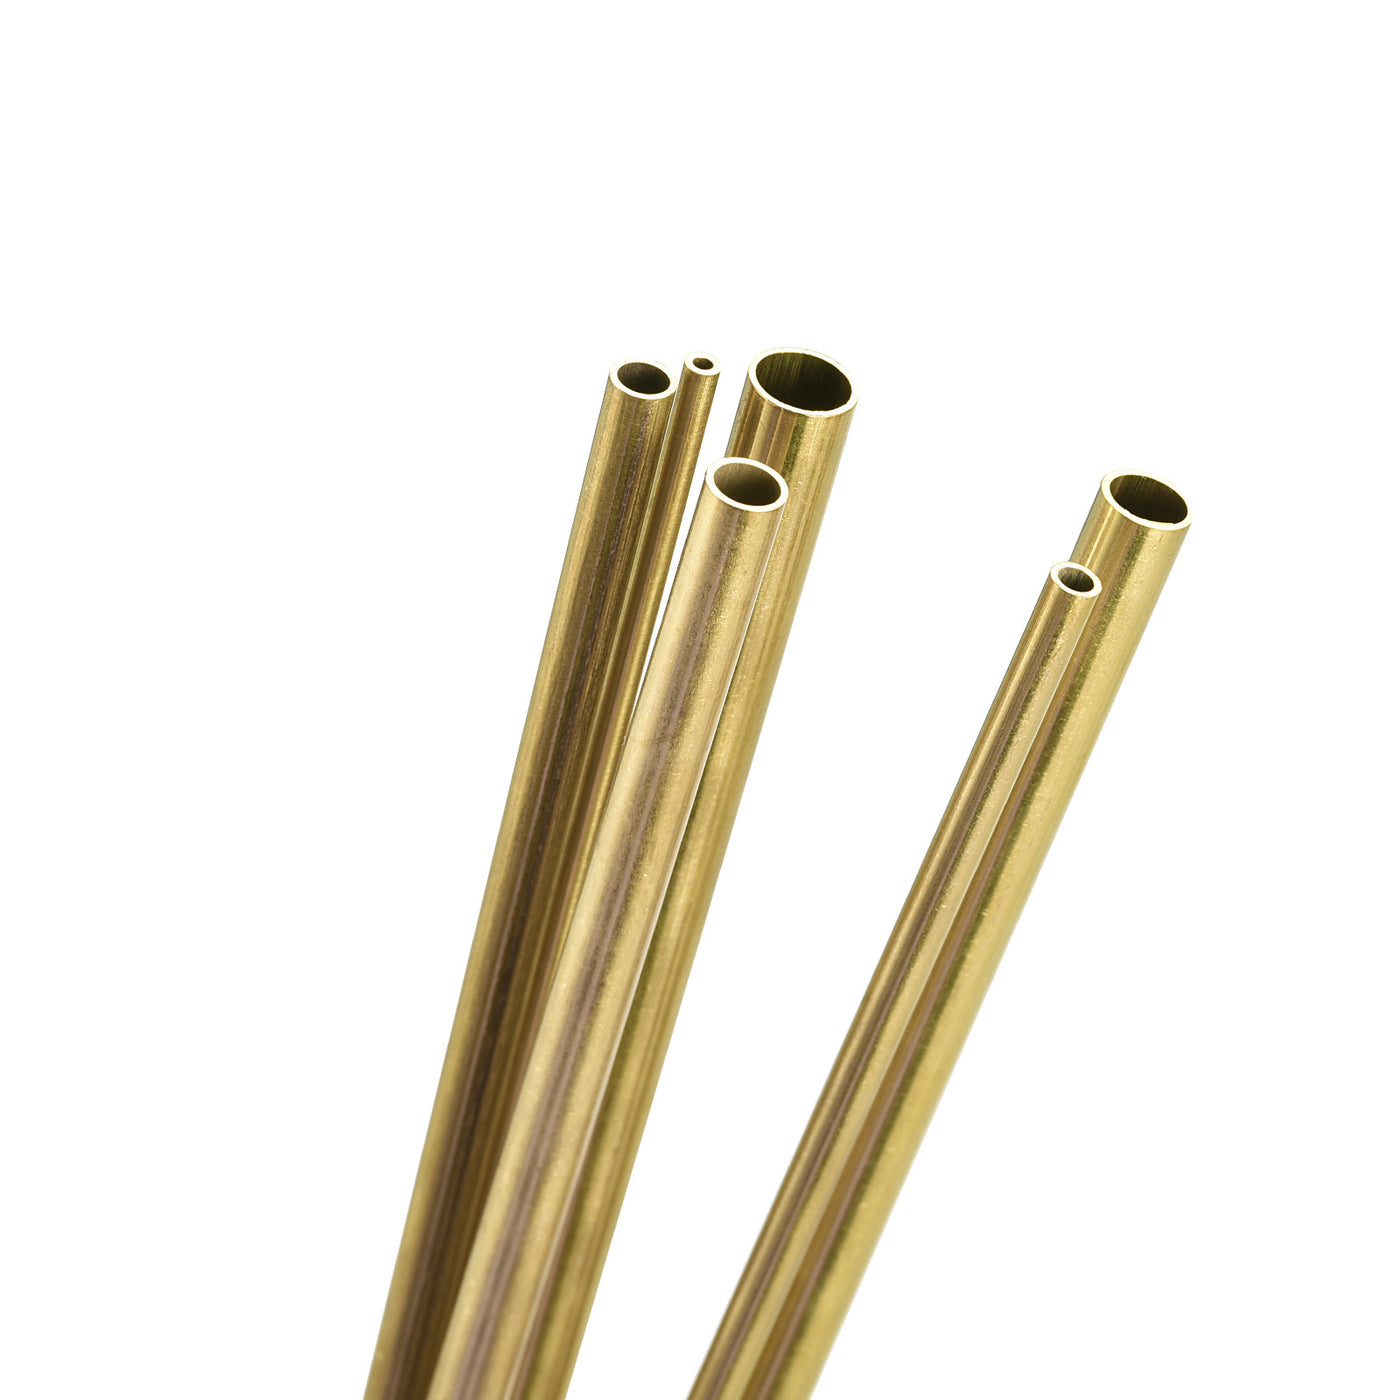 uxcell Uxcell Brass Tube, 3mm 4mm 5mm 6mm 7mm 8mm OD x 1mm Wall Thickness 200mm Length Metal Tubing, Pack of 6